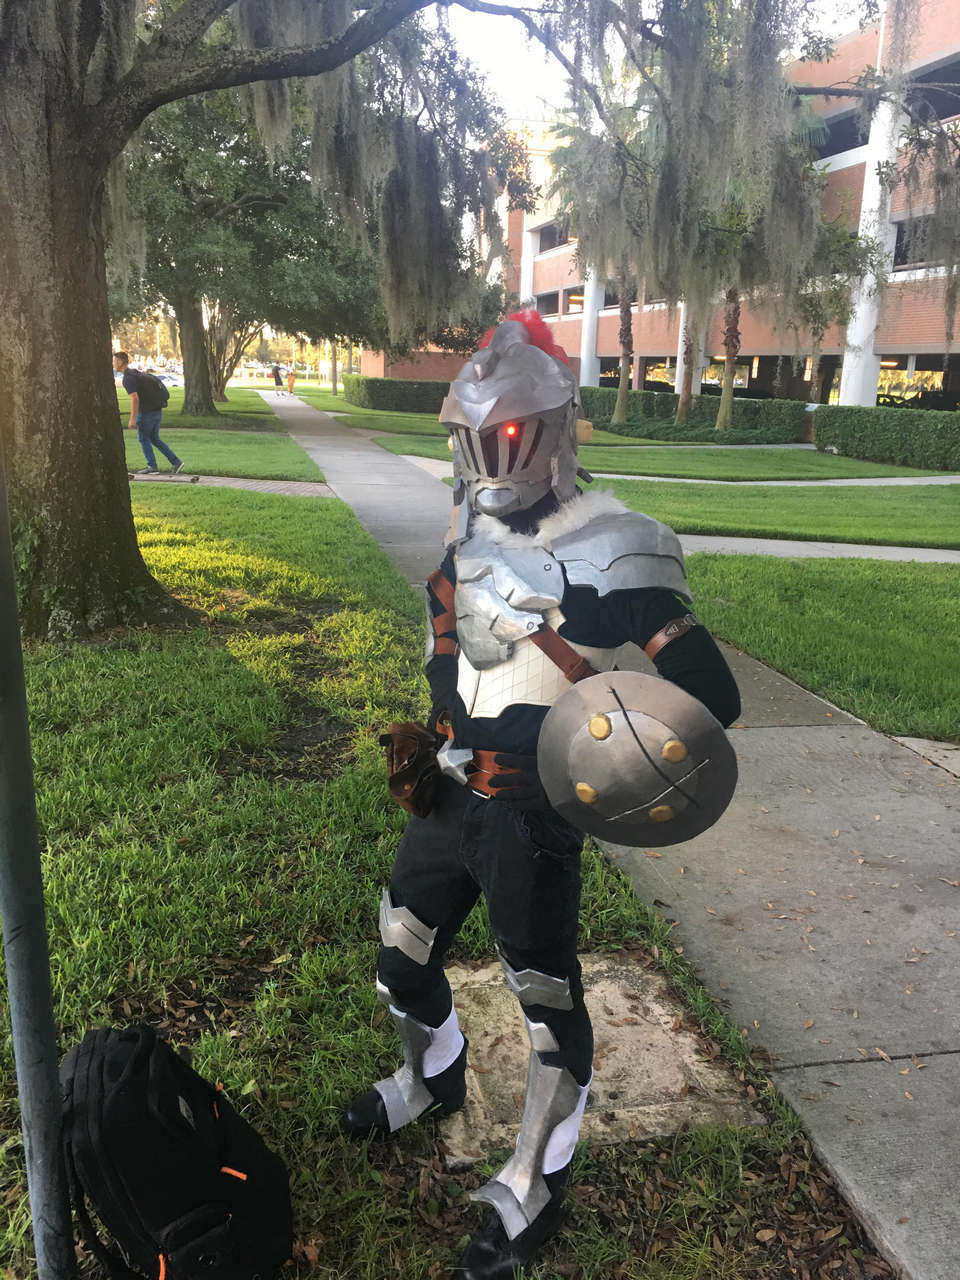 This Cosplayer Seth I Met Walking Around Campus Today Deserves Some Praise For His Costum